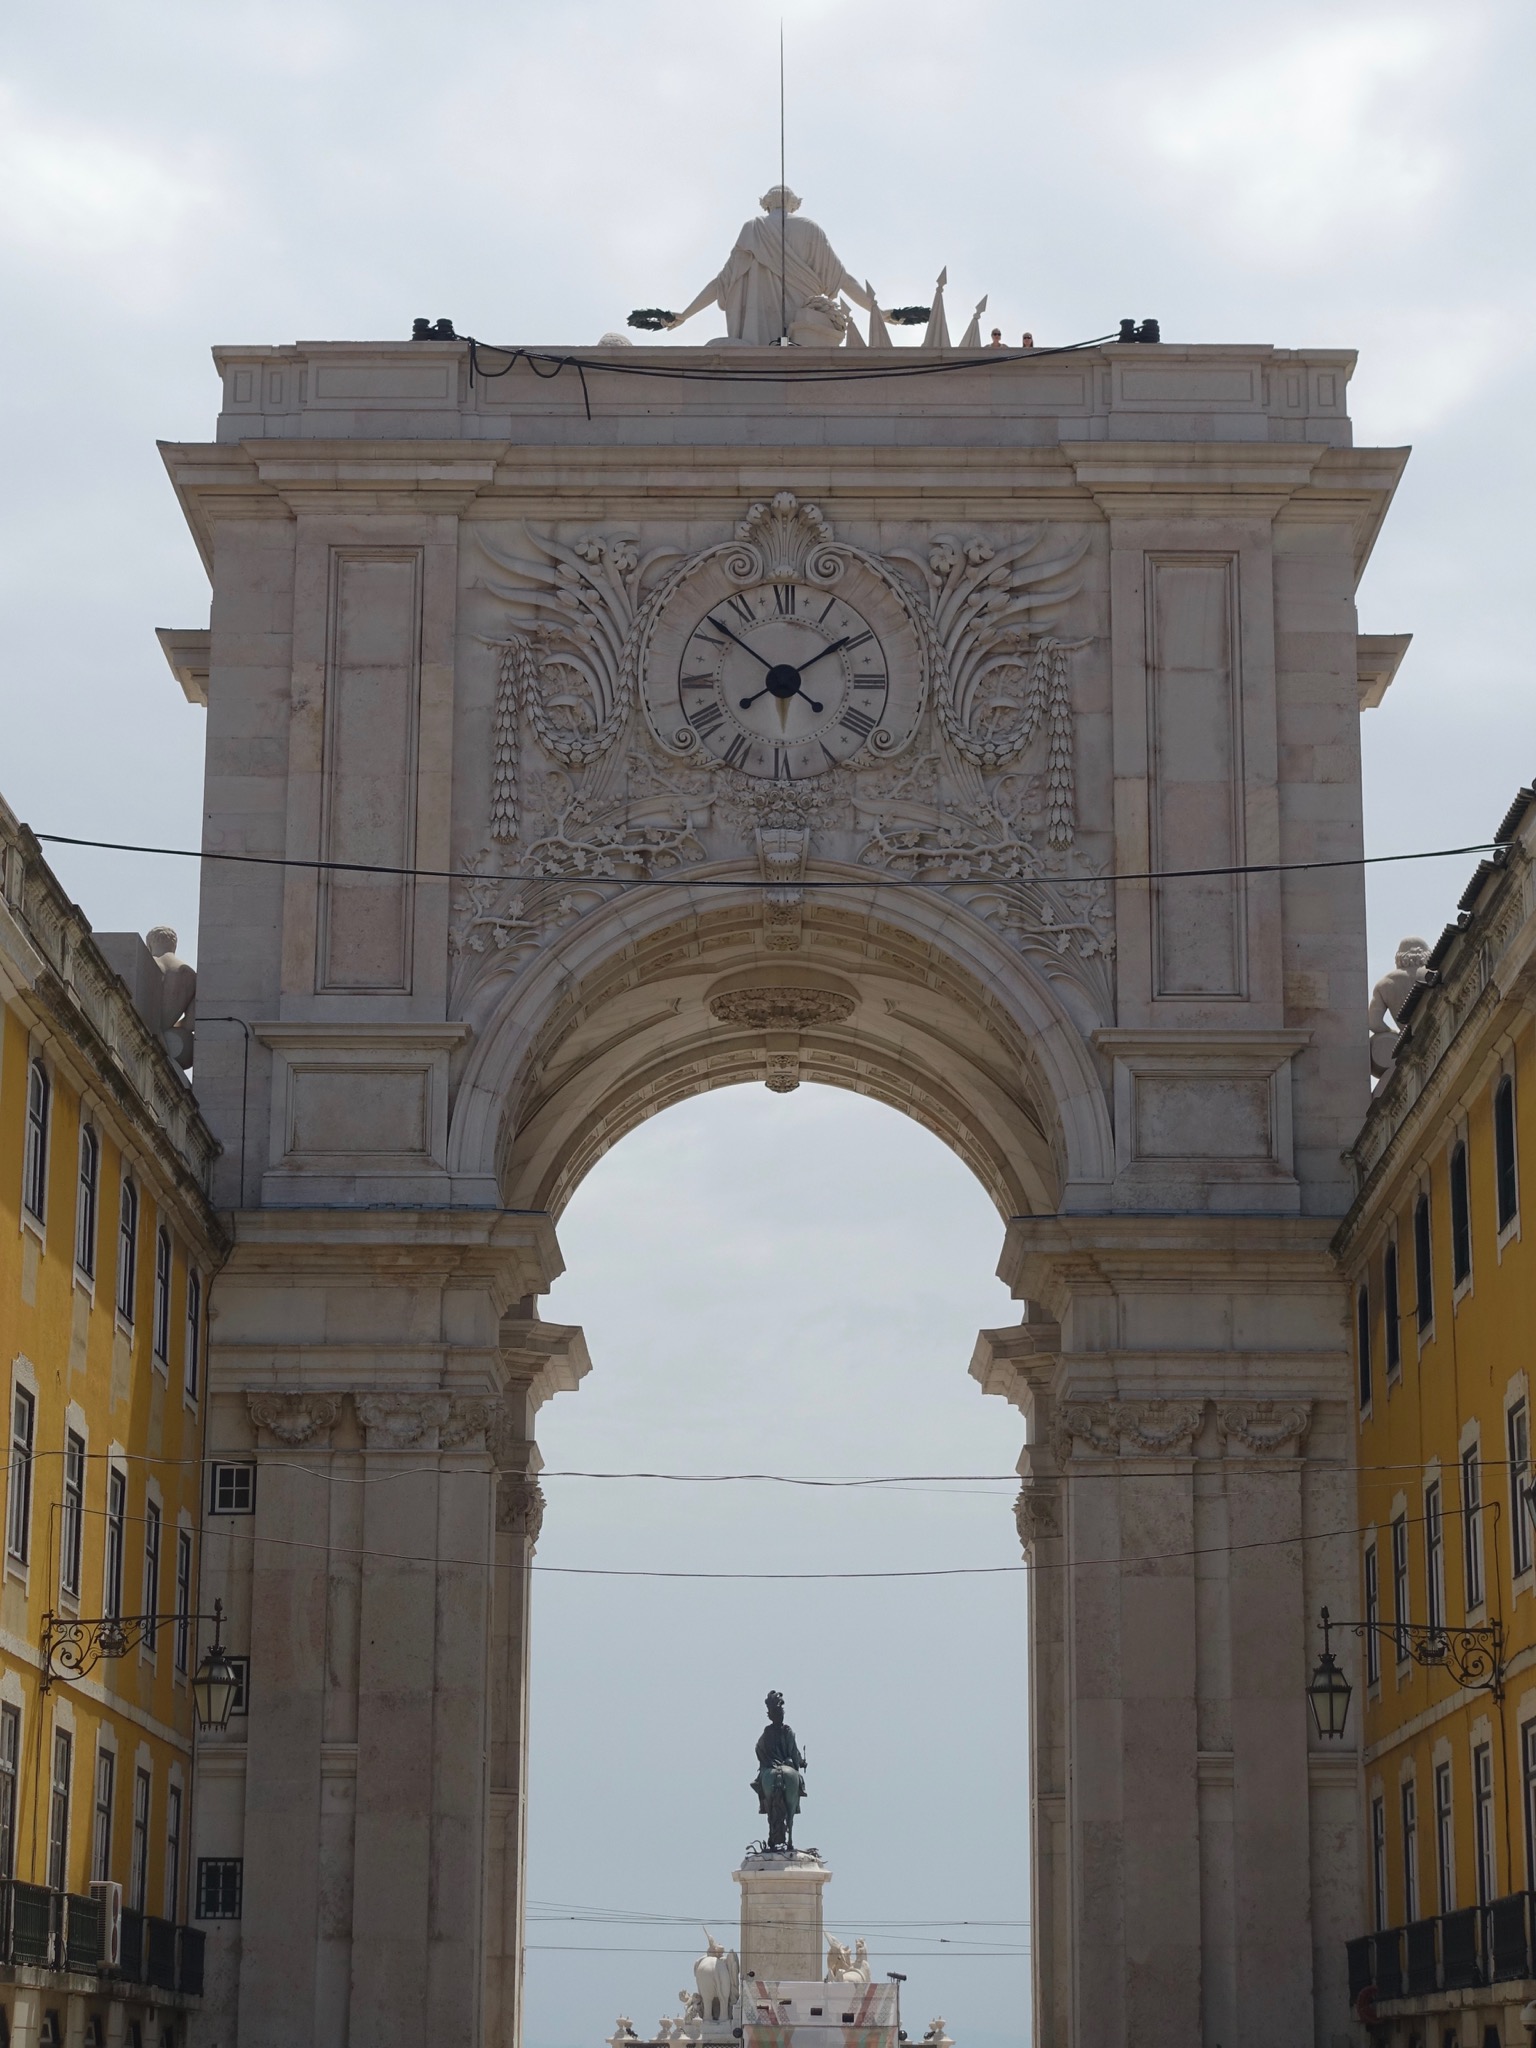 Photo 46 of 86 from the album Highlights Lisbon 2015.